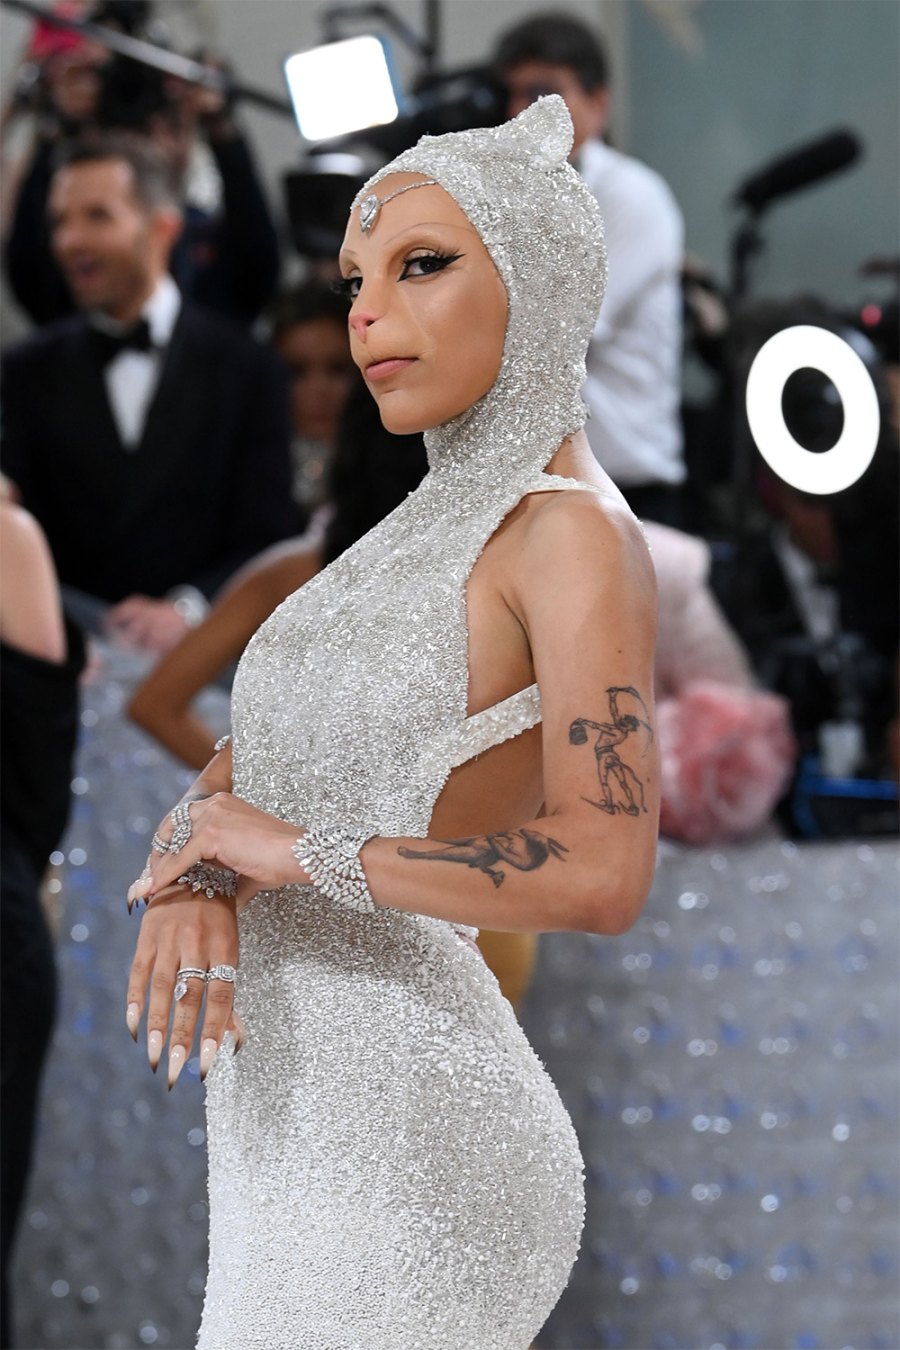 Doja Cat Arrived at the 2023 Met Gala in a Feline Gown Photos